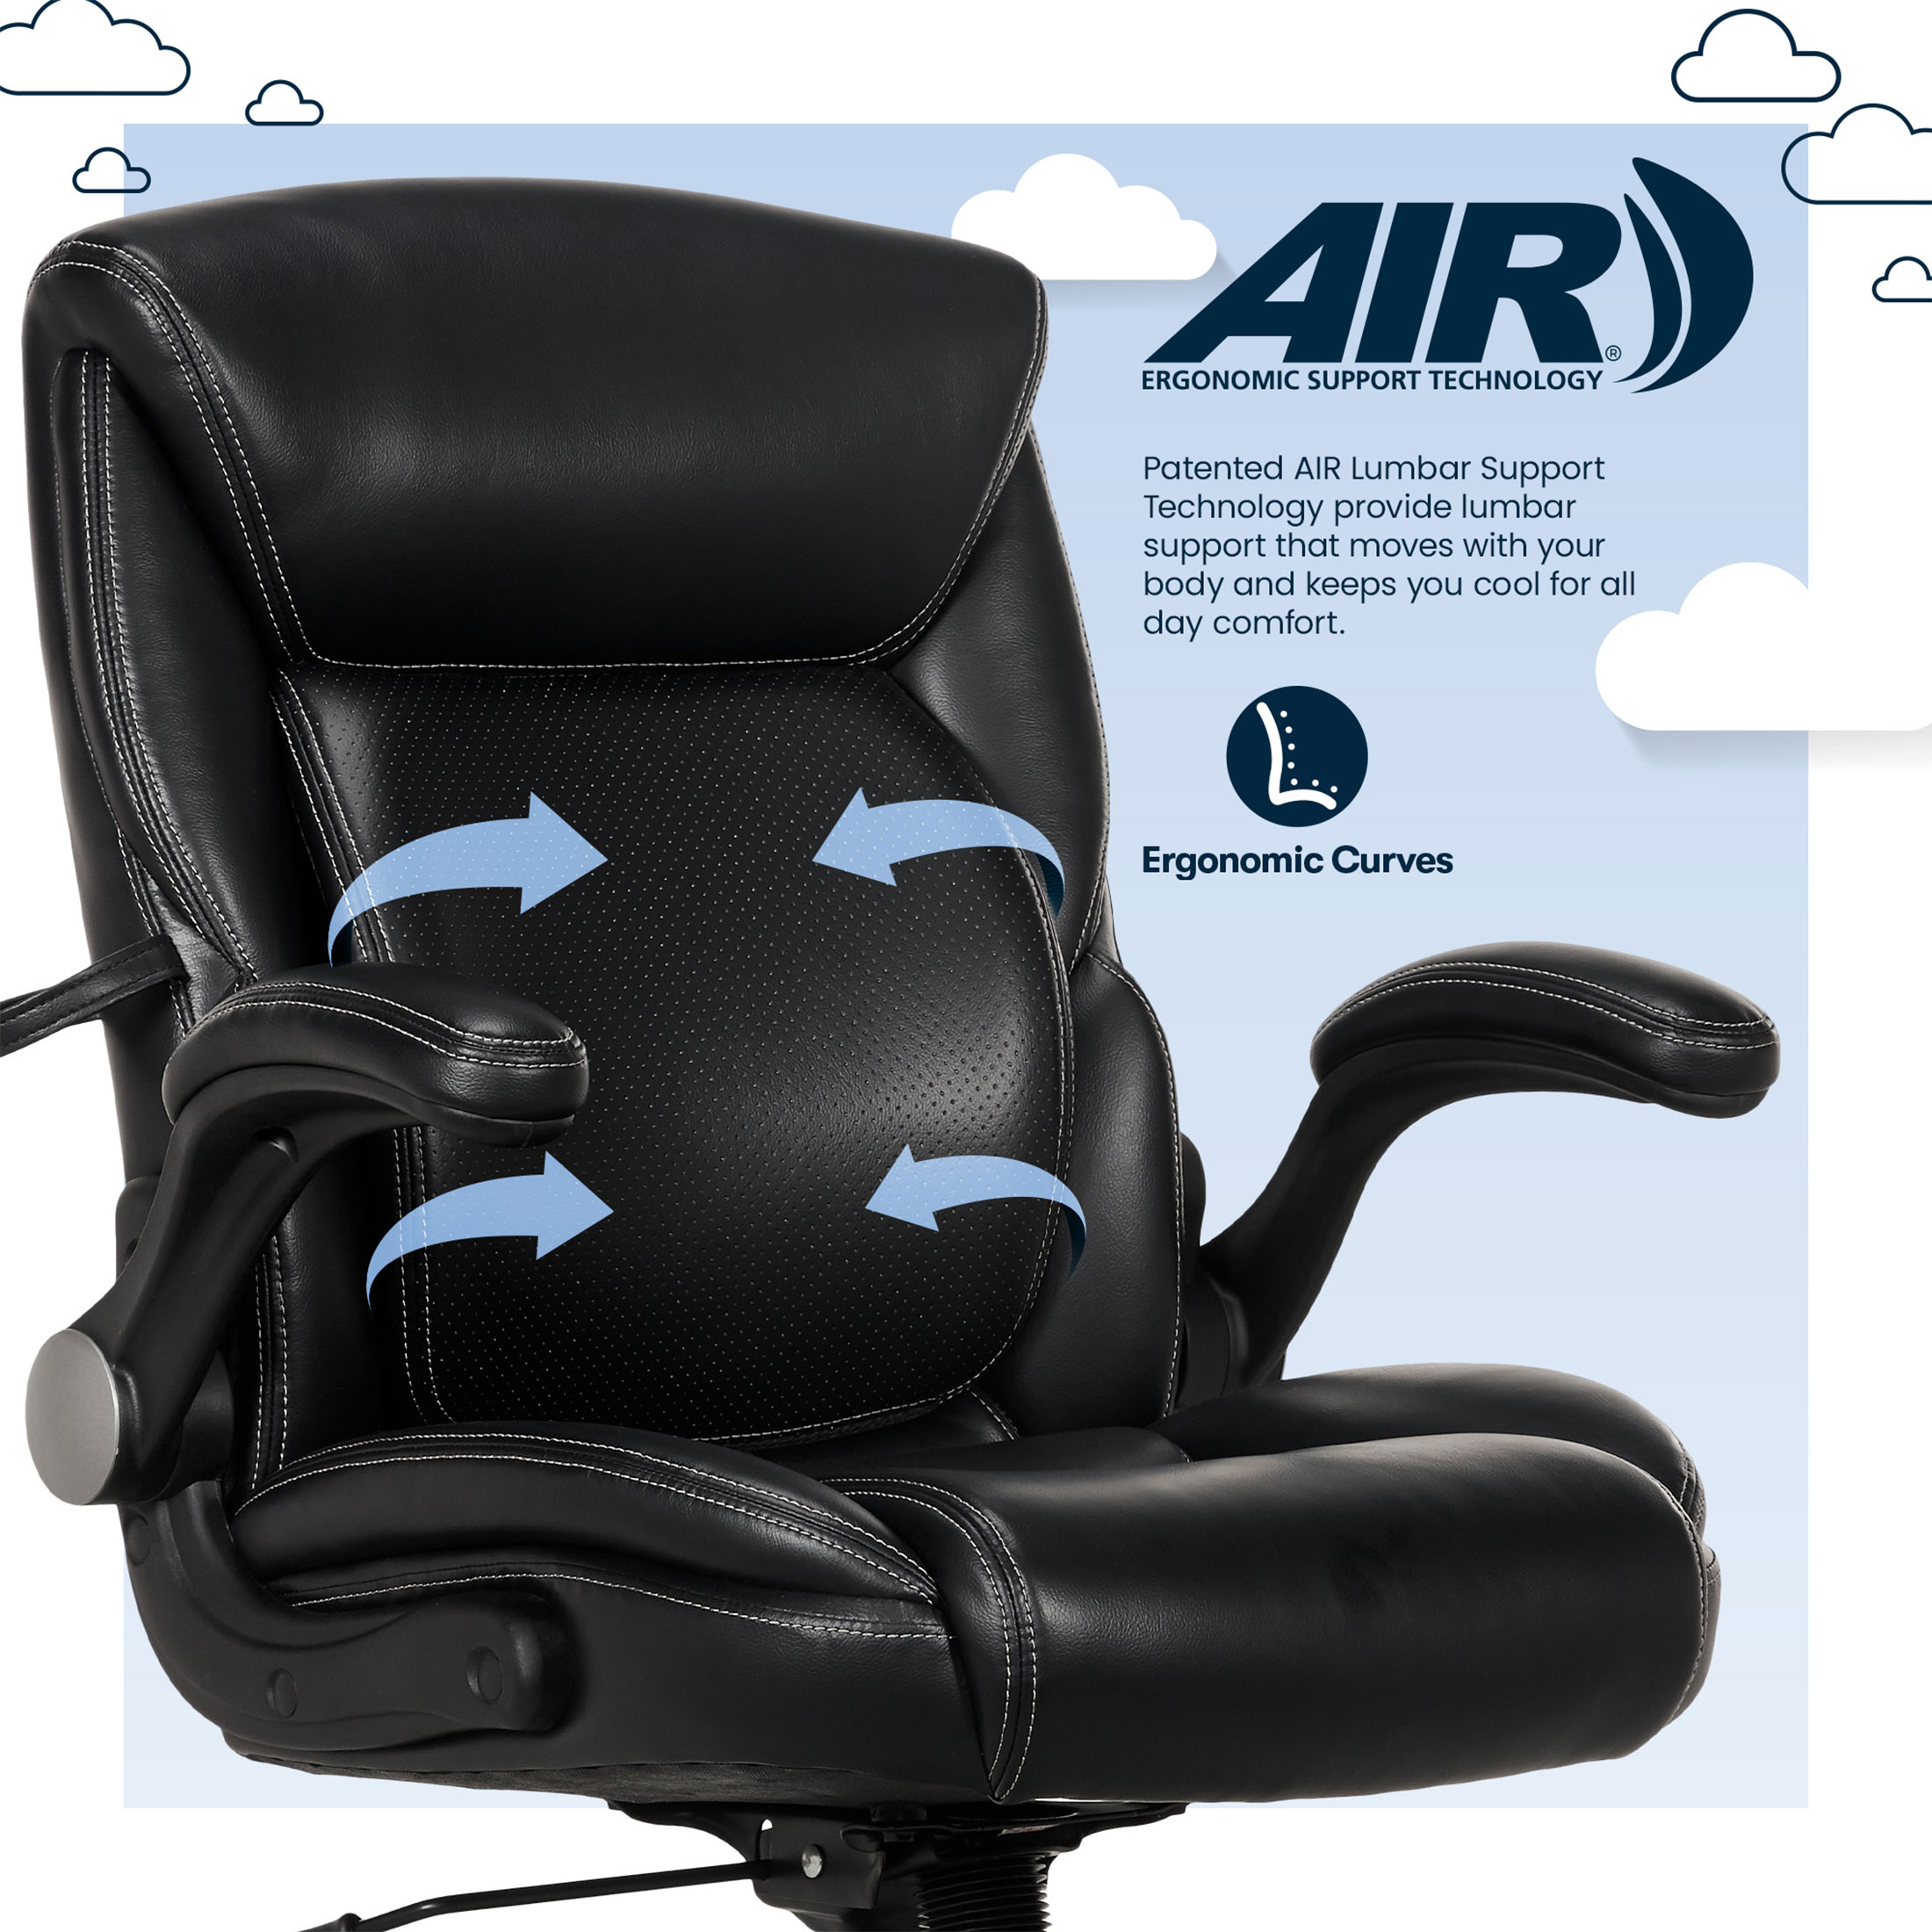 Serta Air Lumbar Bonded Leather Manager Office Chair, Black - image 5 of 15